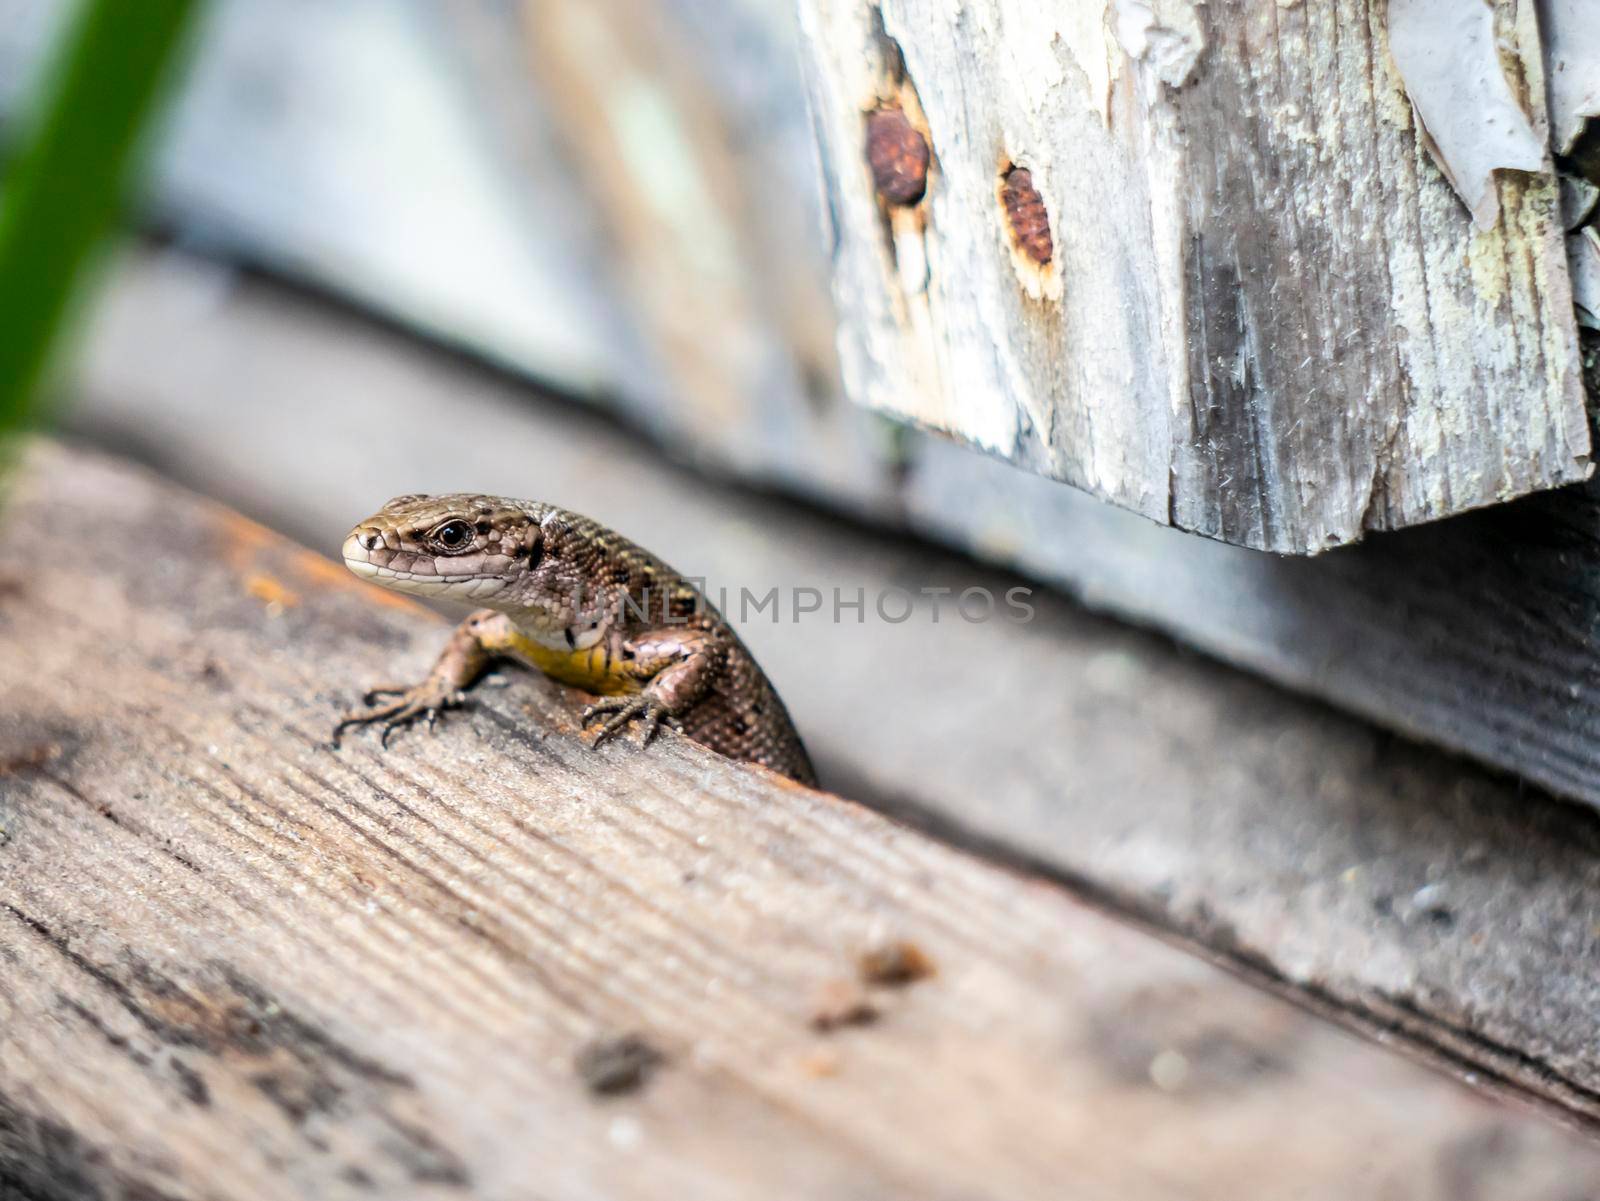 A small lizard with a tail basks in the sun in the summer sitting on wooden boards in the park by lempro